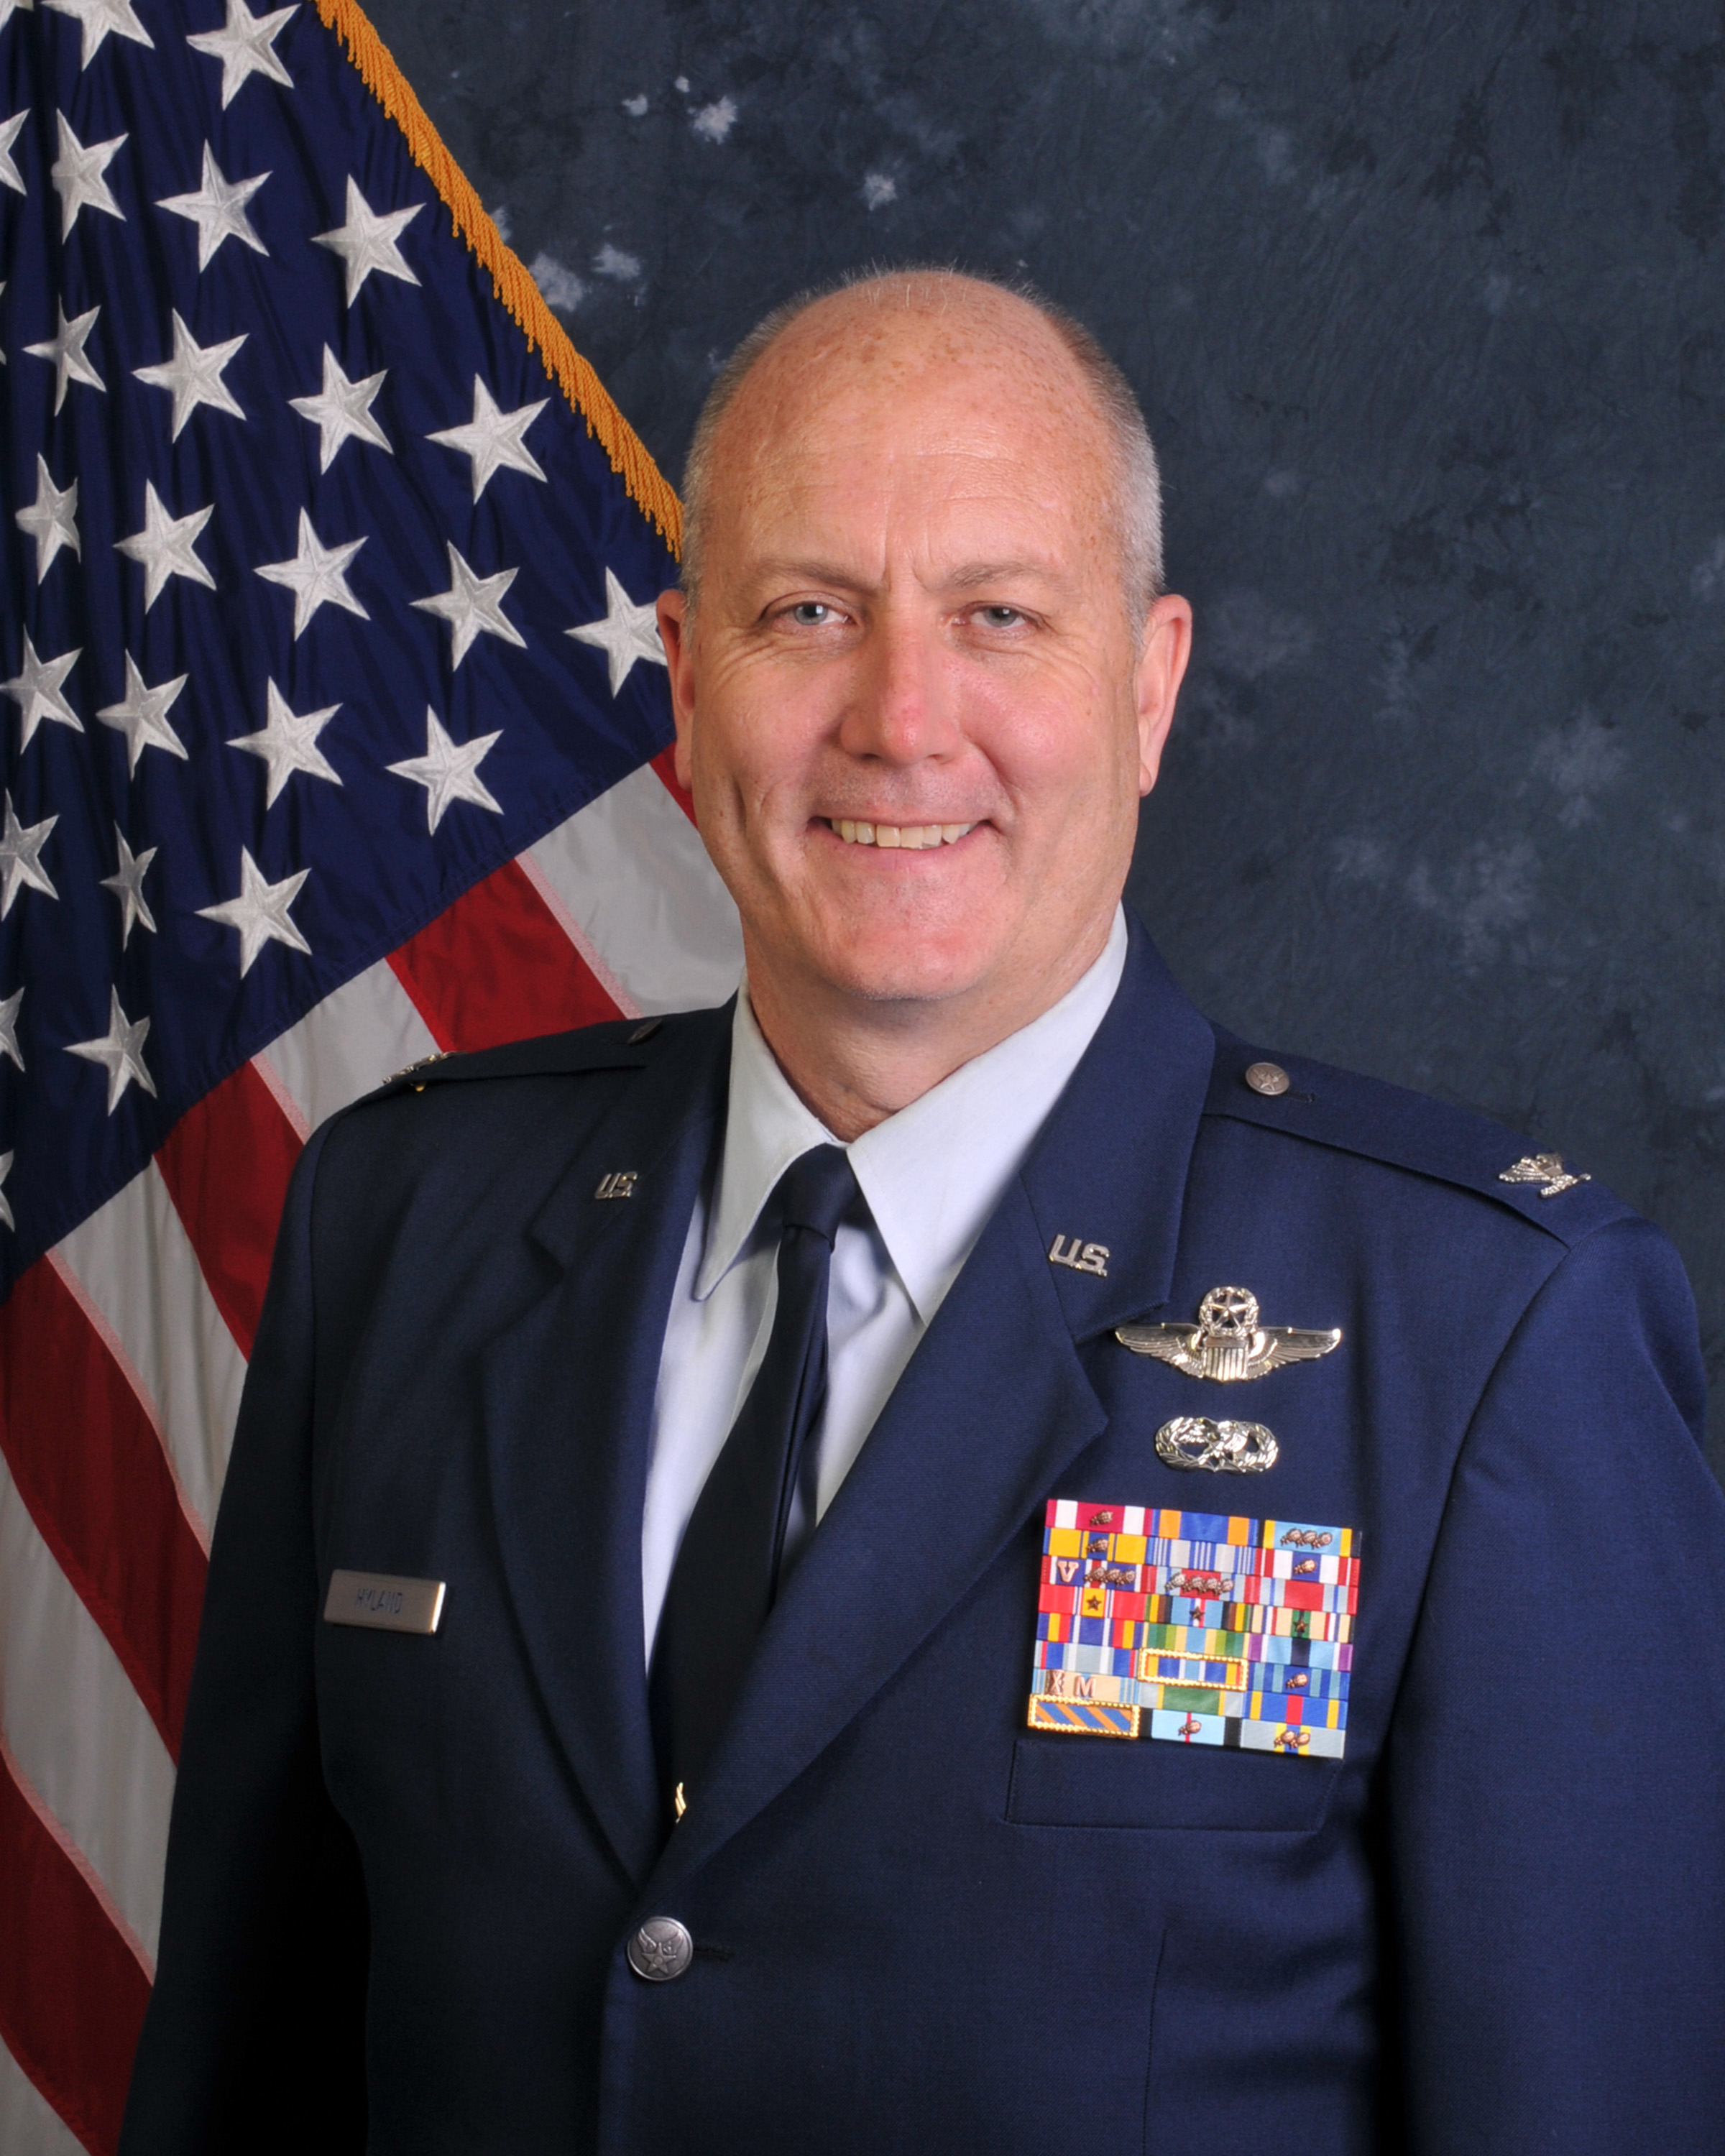 COLONEL RAYMOND L. HYLAND JR. > 171st Air Refueling Wing > Display